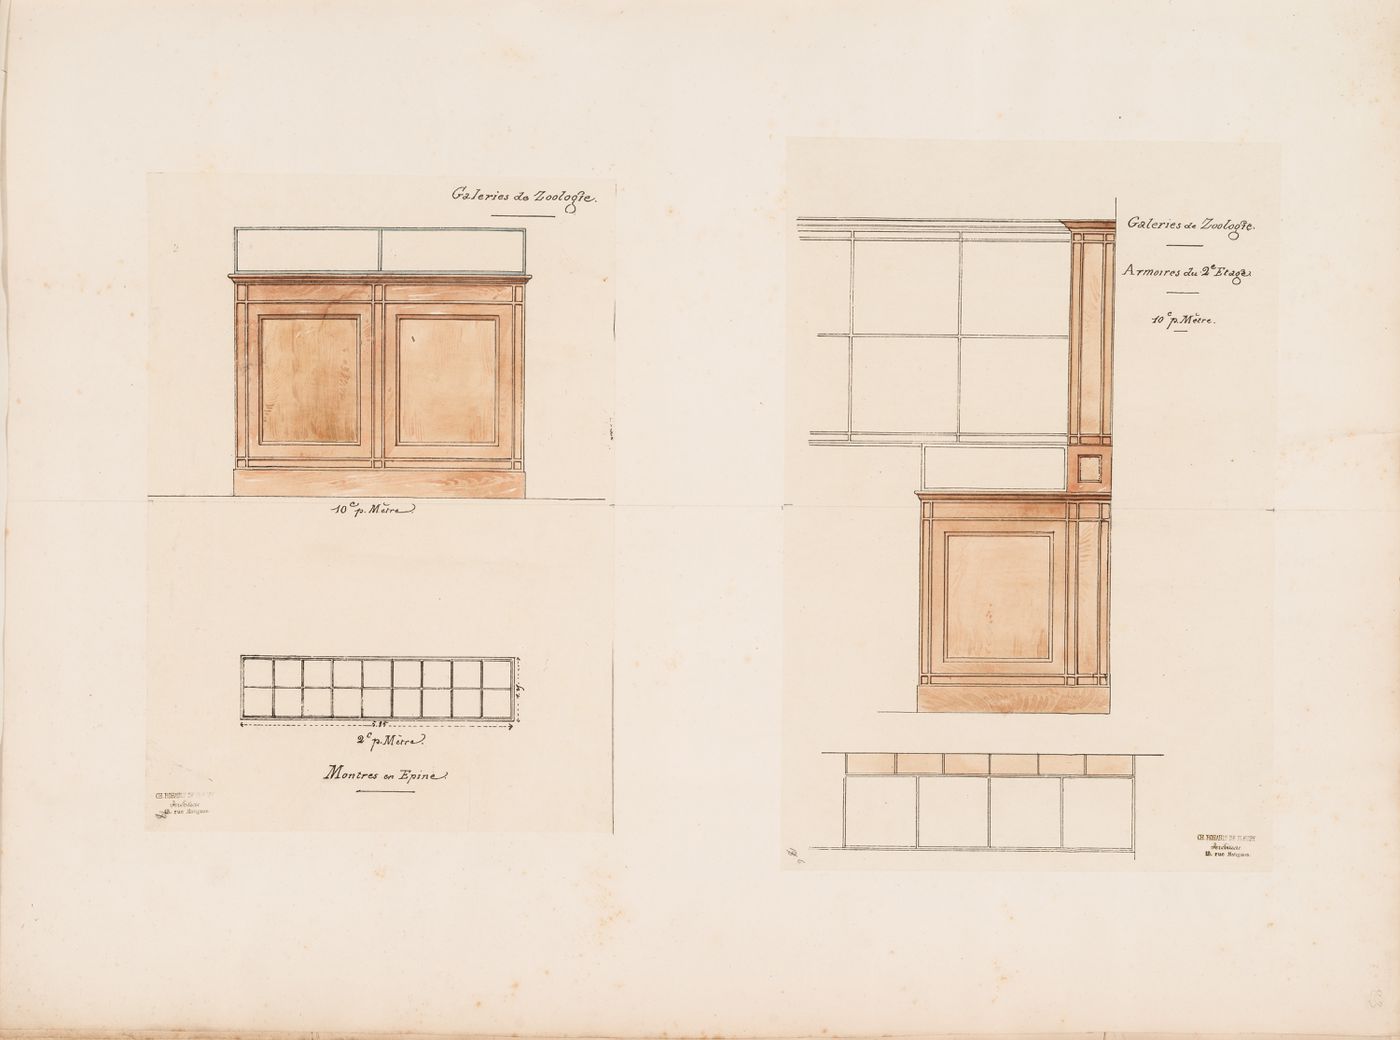 Project for a Galerie de zoologie, 1846: Plans and elevations for the display cabinets for spines and for the display cabinets on the second floor